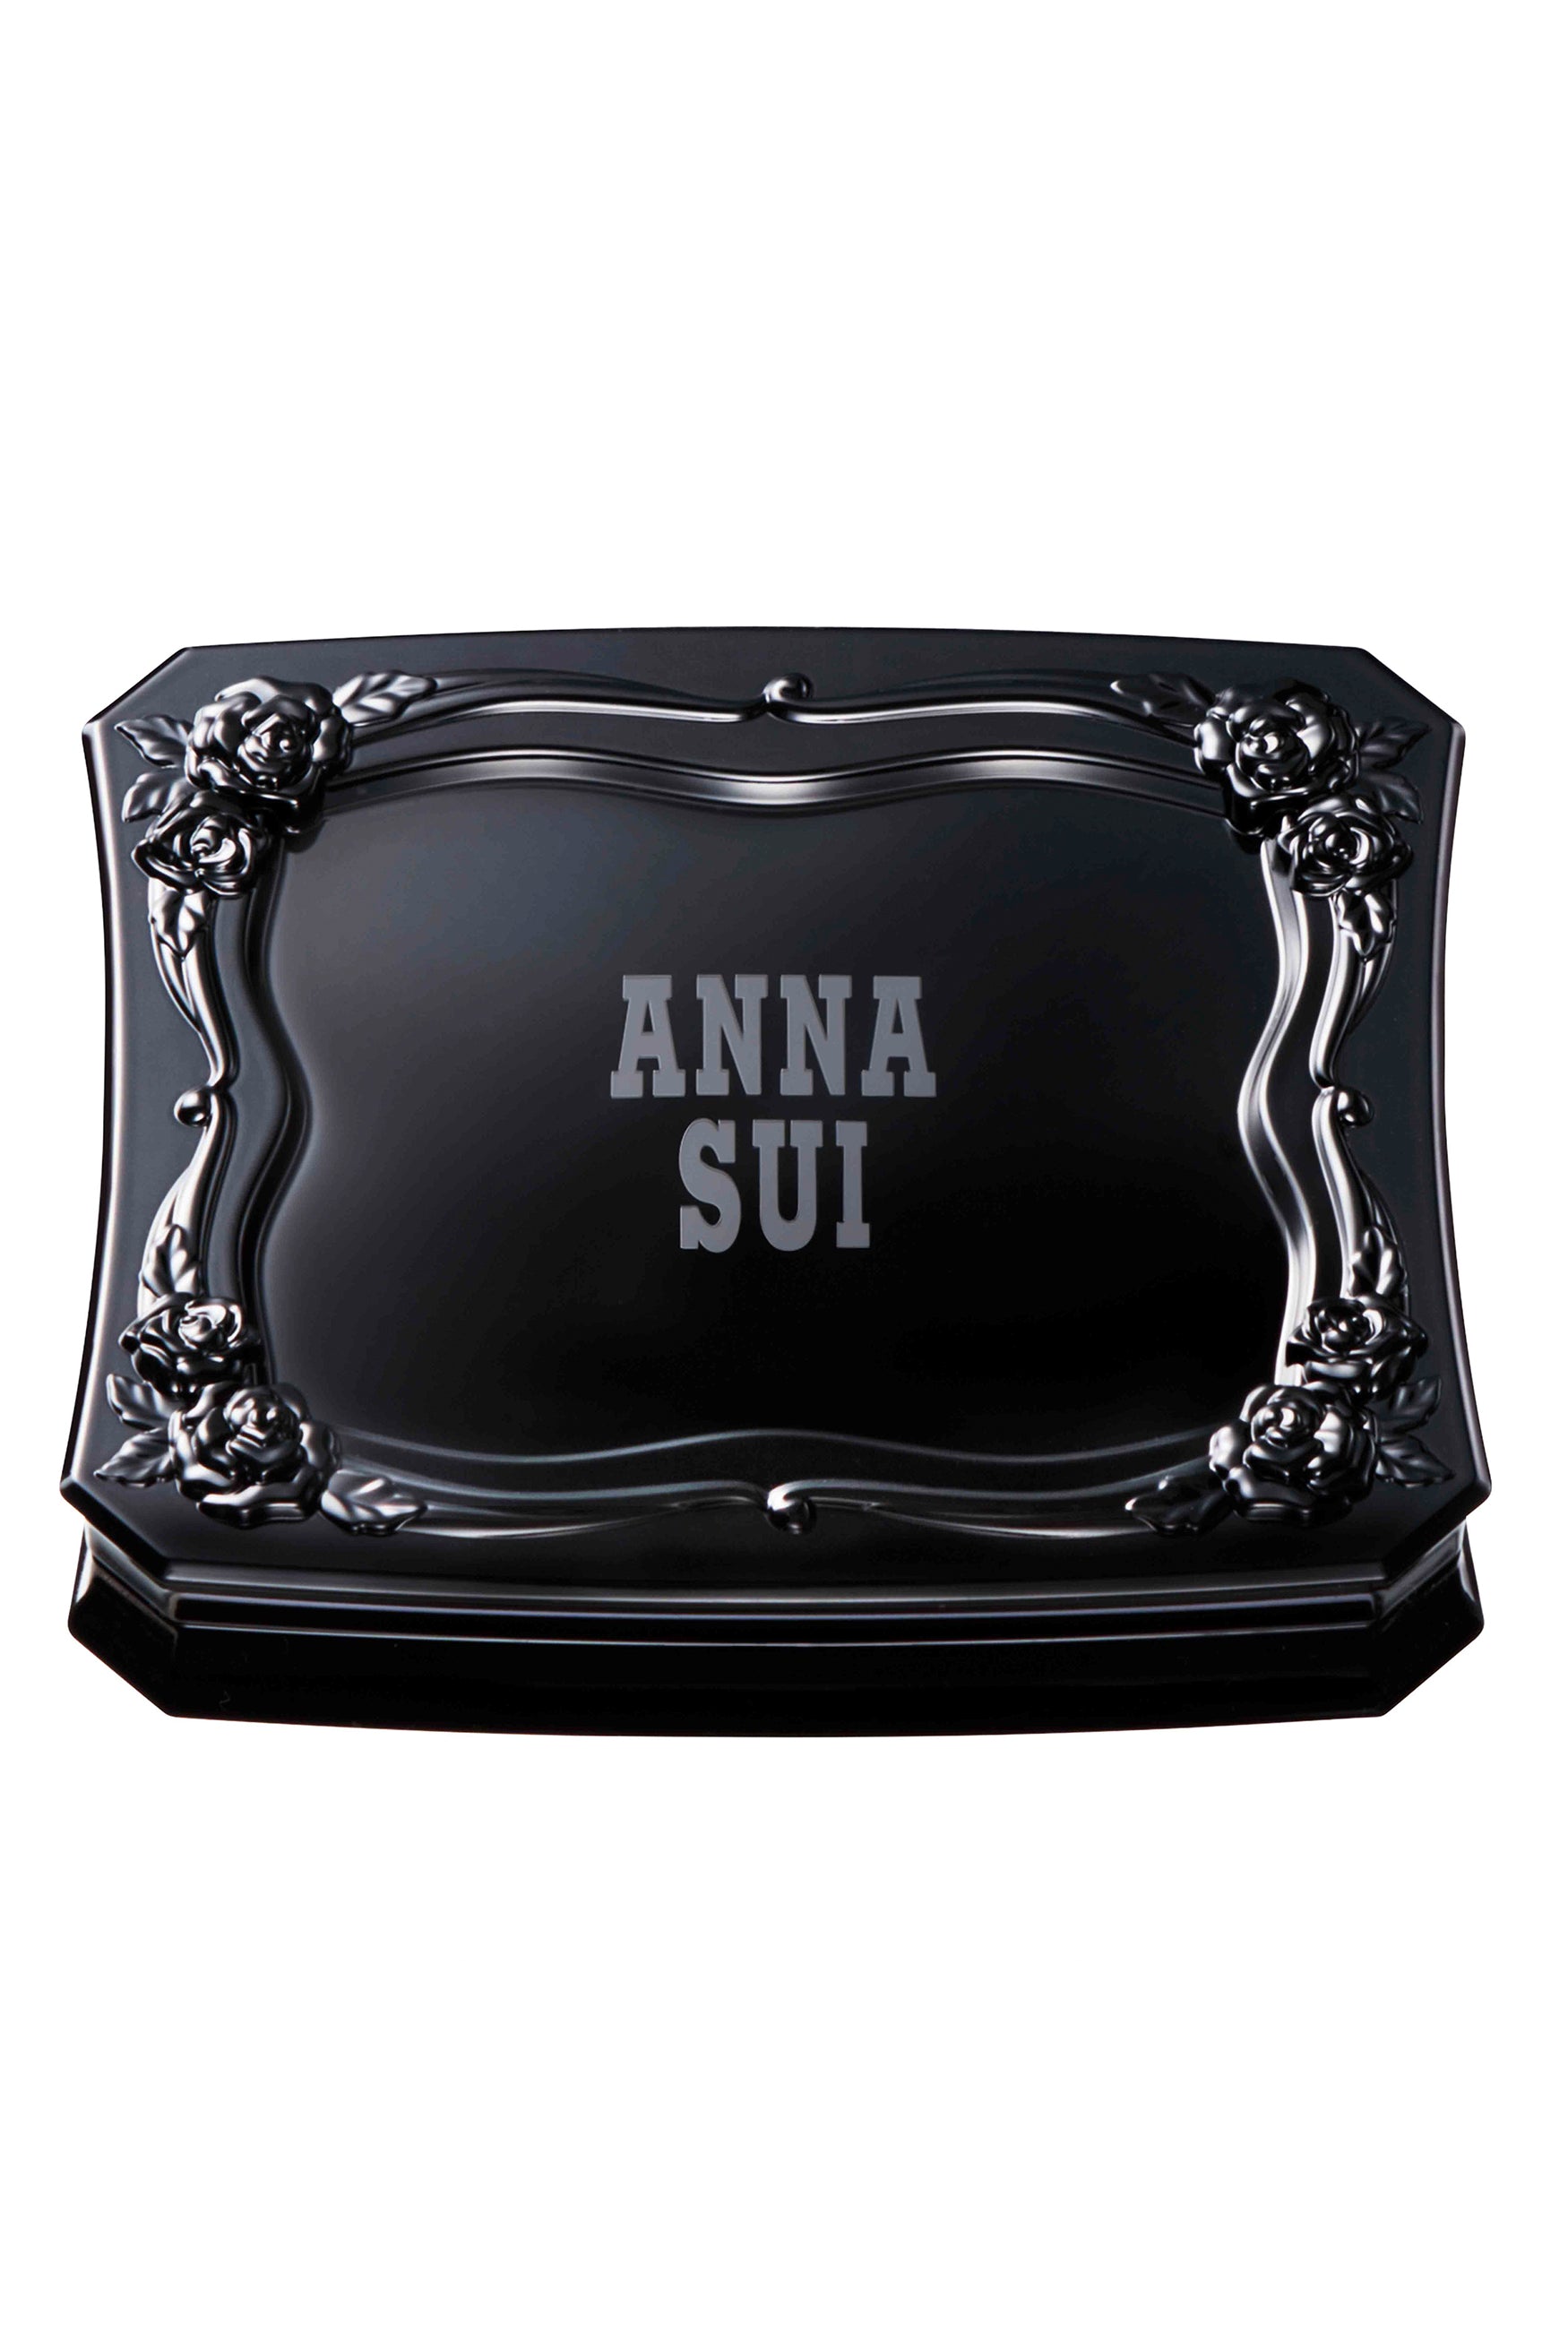 Black squared containers with curvy edges, raised roses pattern edge of top lid, A.S. label white